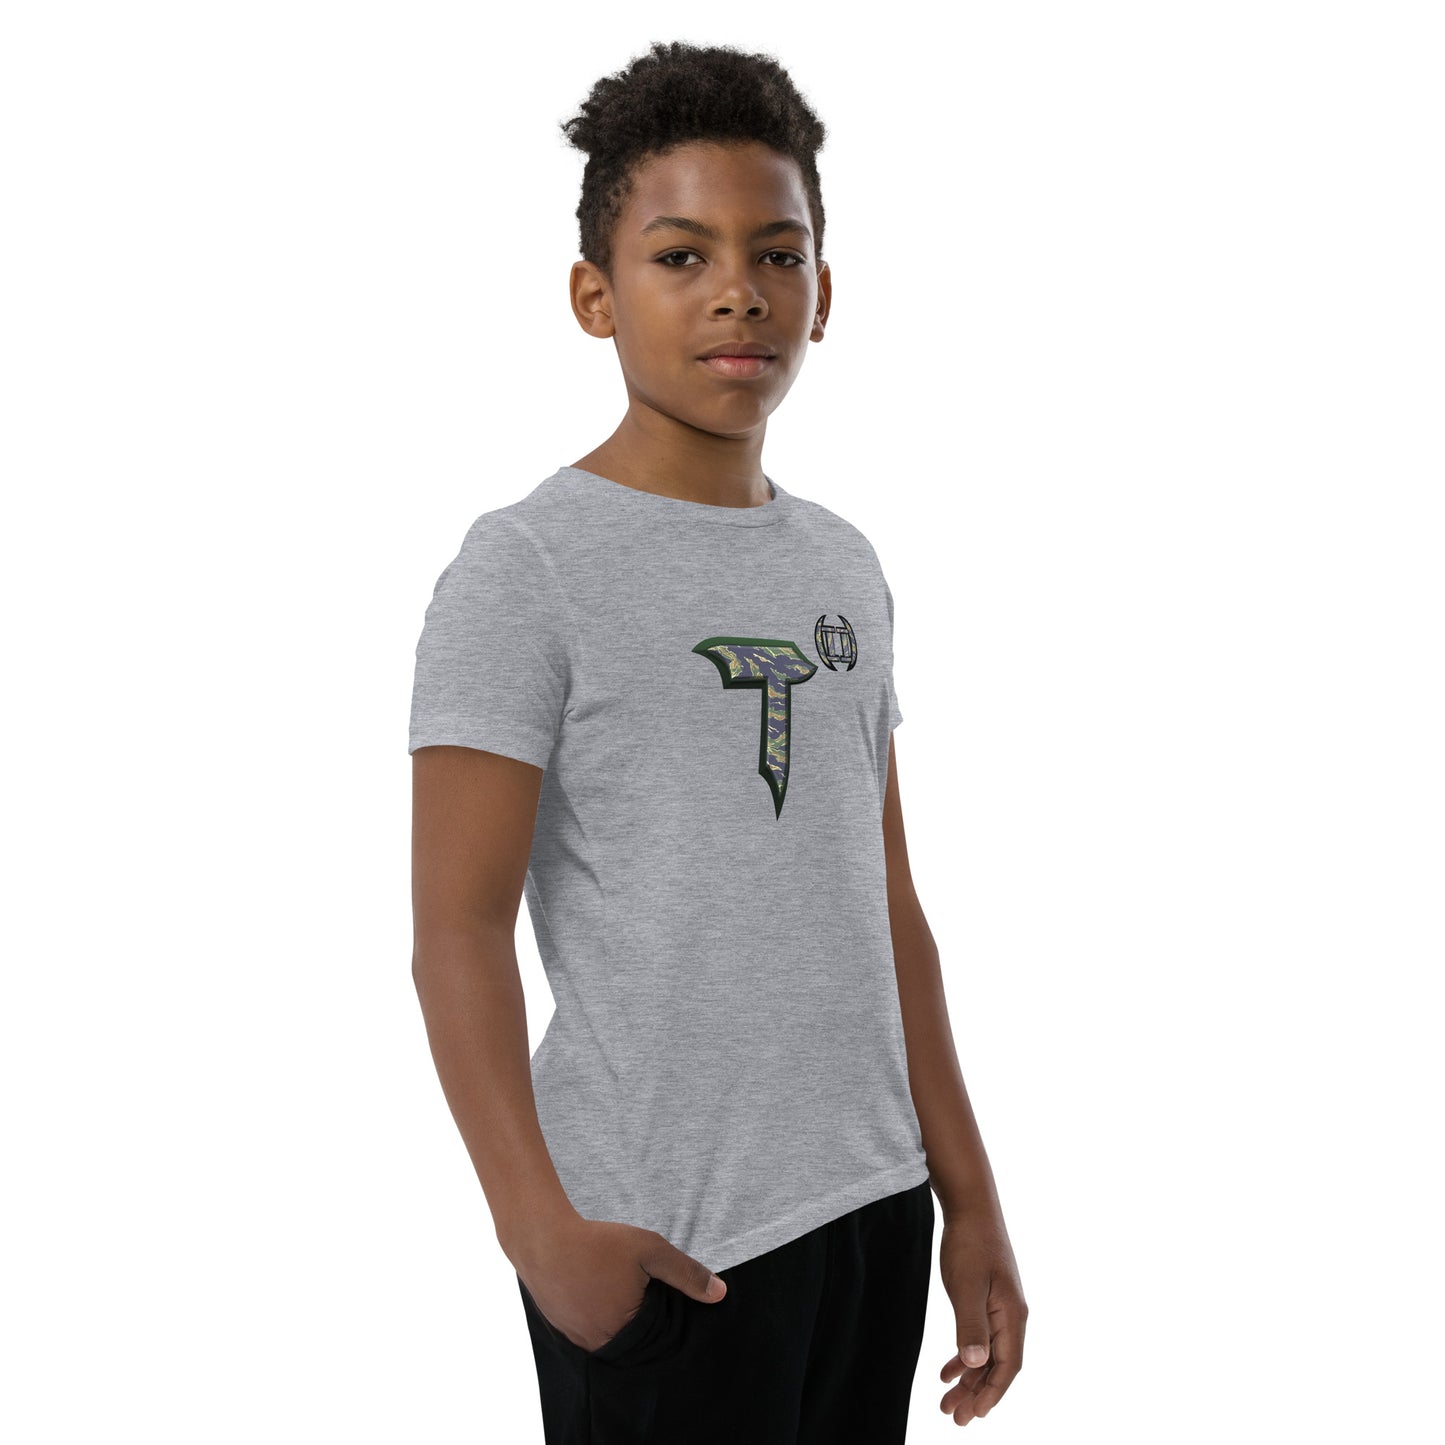 Youth Short Sleeve T-Shirt T(2) Tiger Stripe Camo Edition